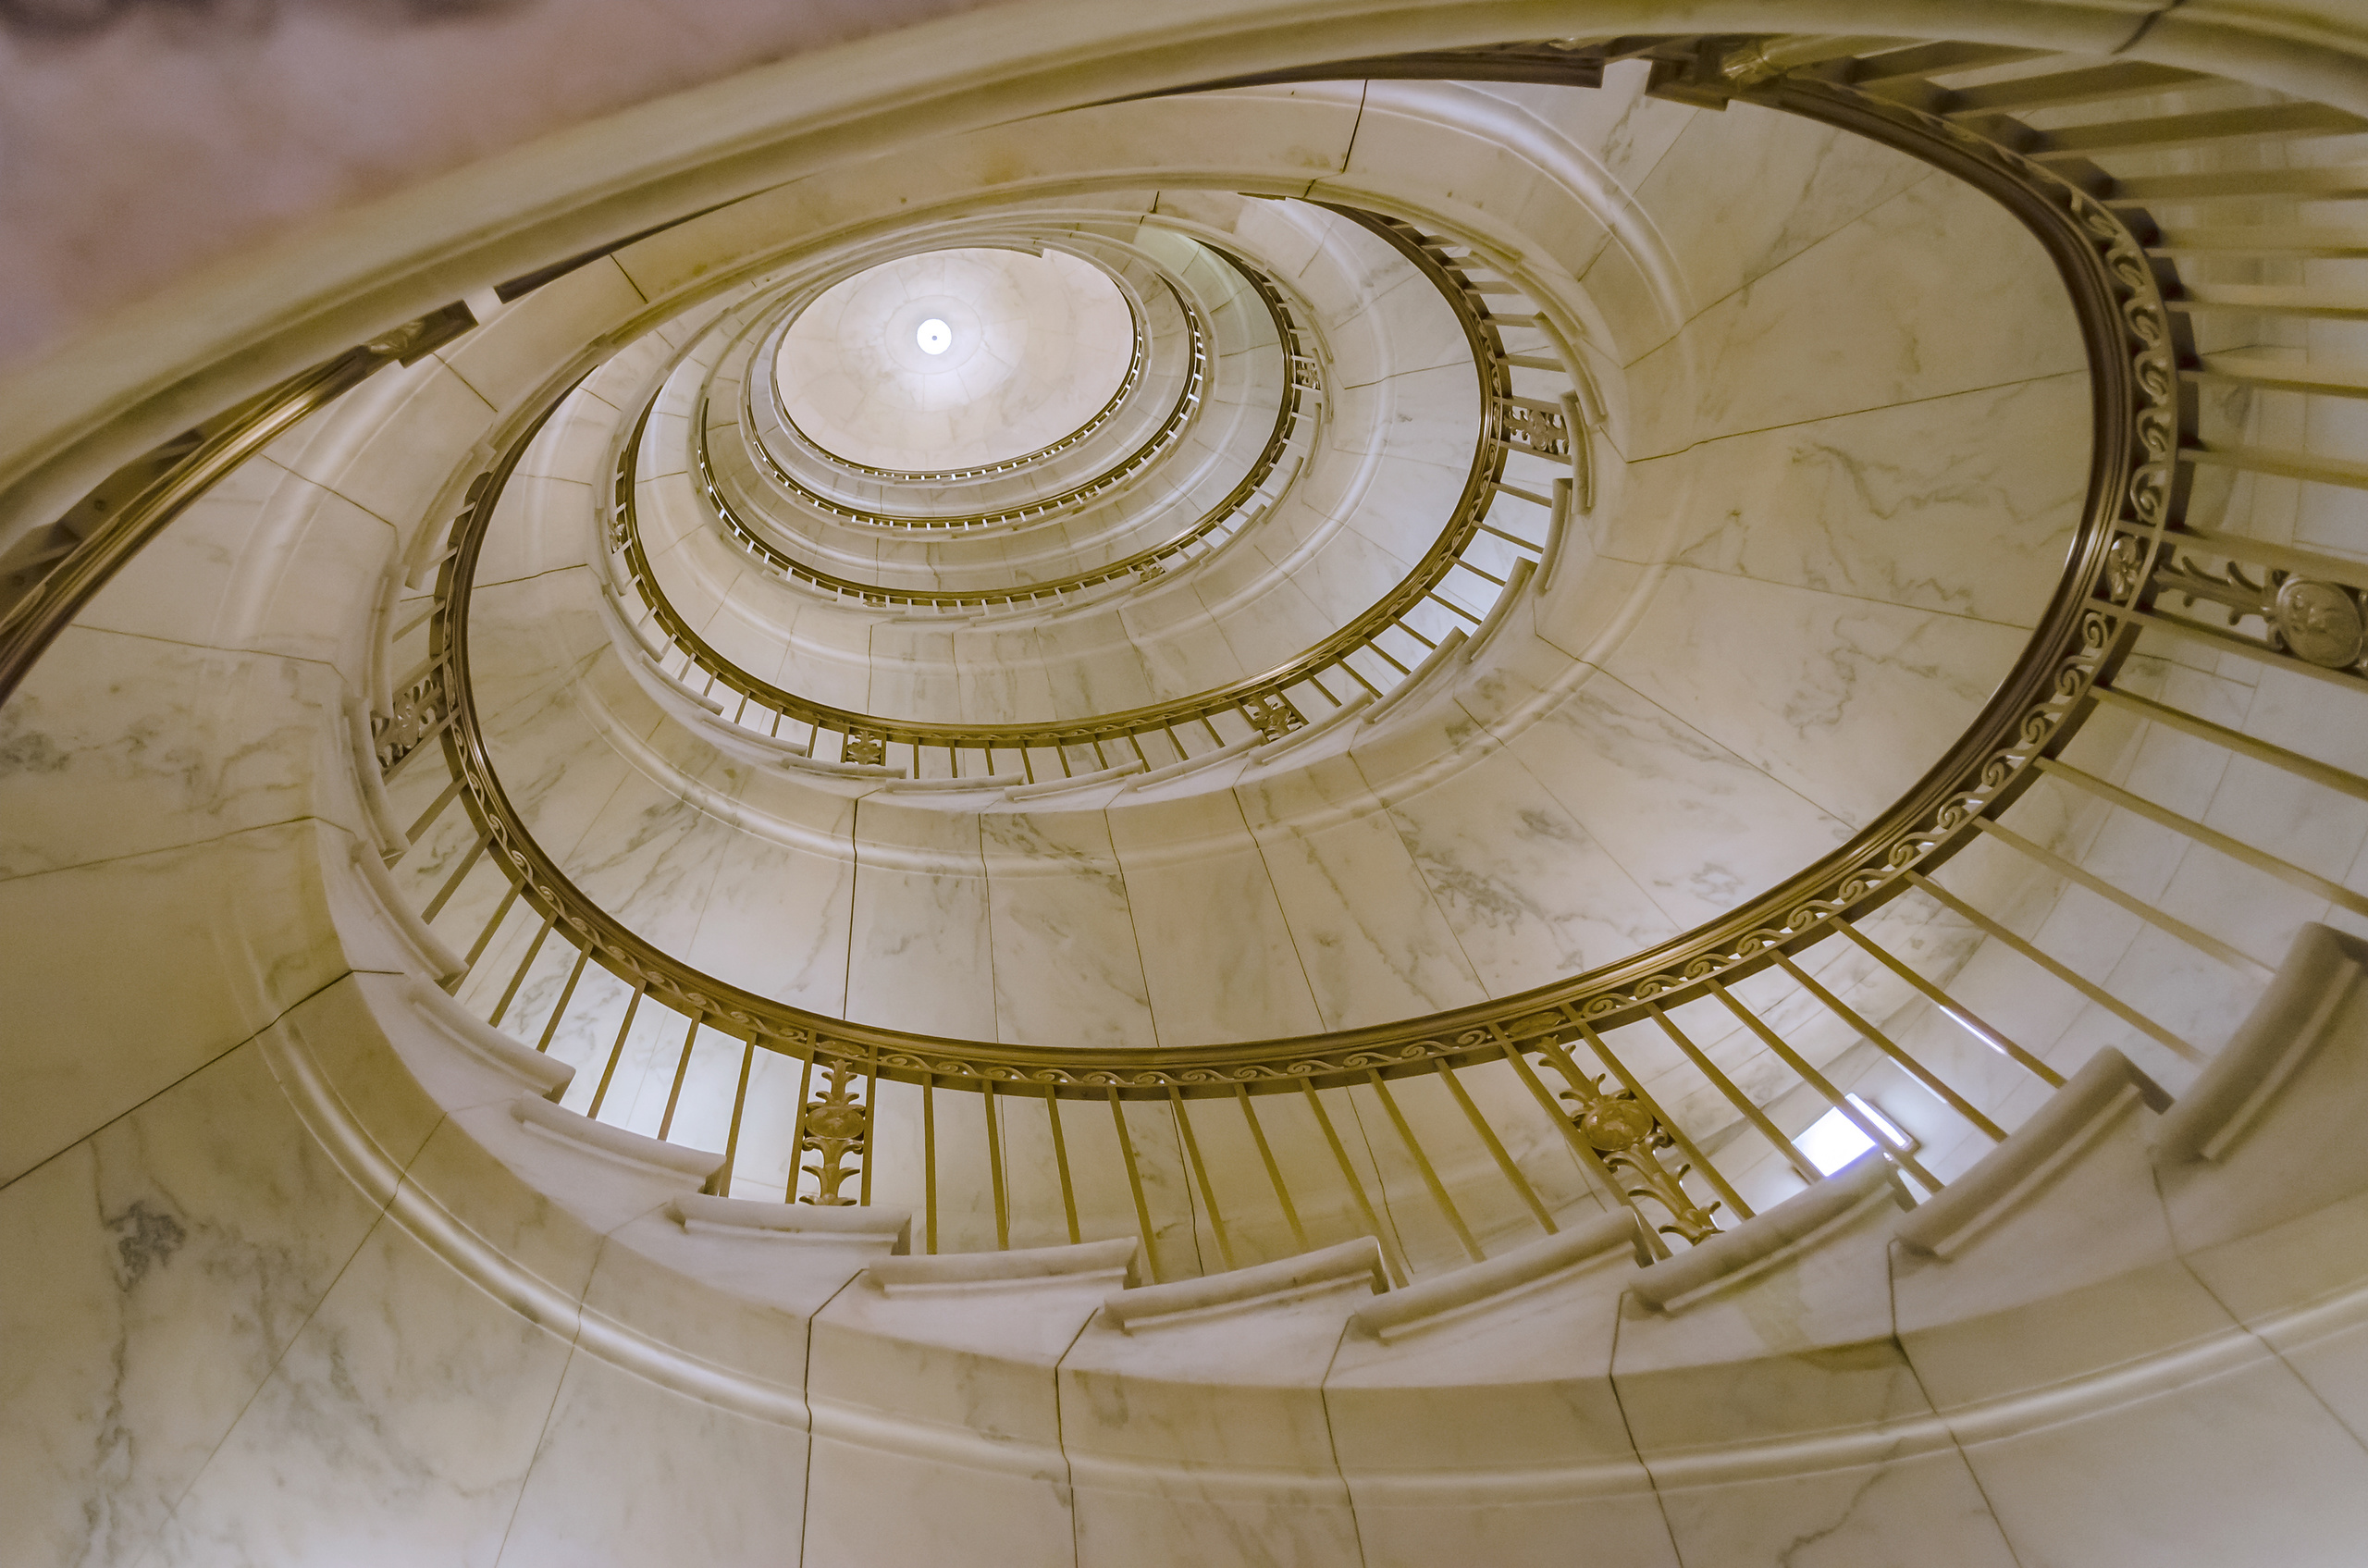 Spiral staircase inside the Supreme Court